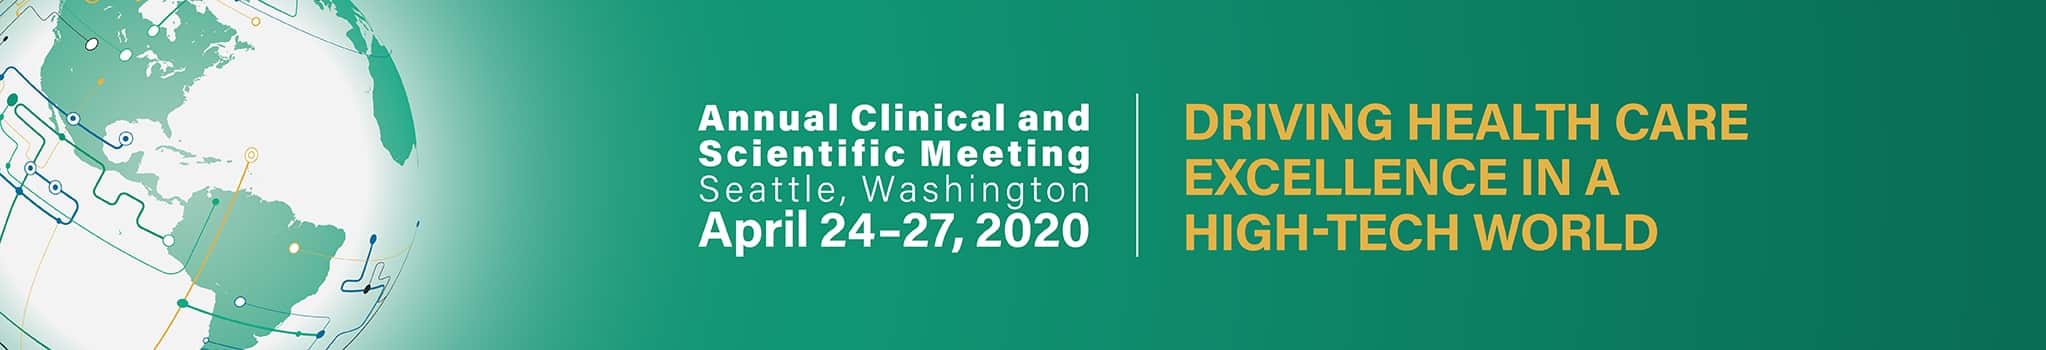 ACOG 2020 Annual Clinical and Scientific Meeting